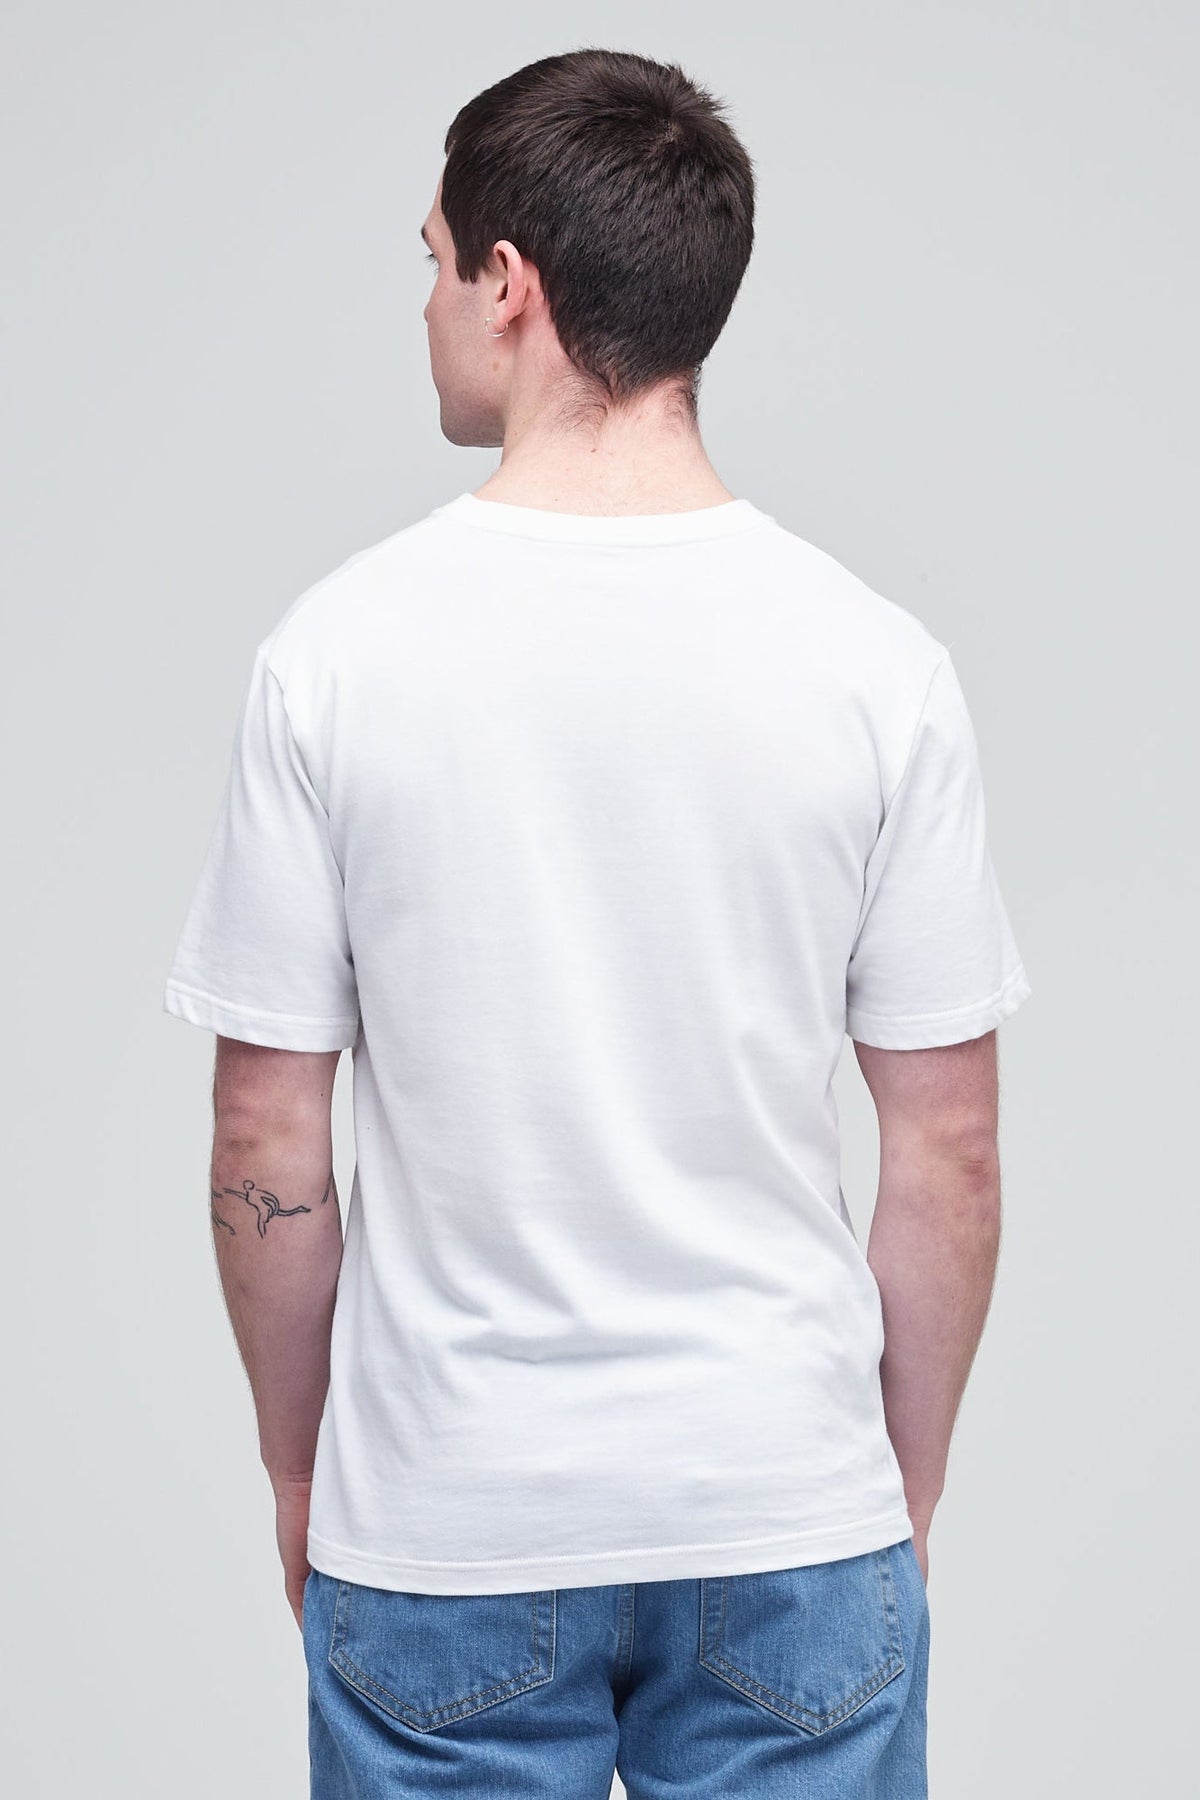 
            Back of male wearing short sleeve t shirt in white